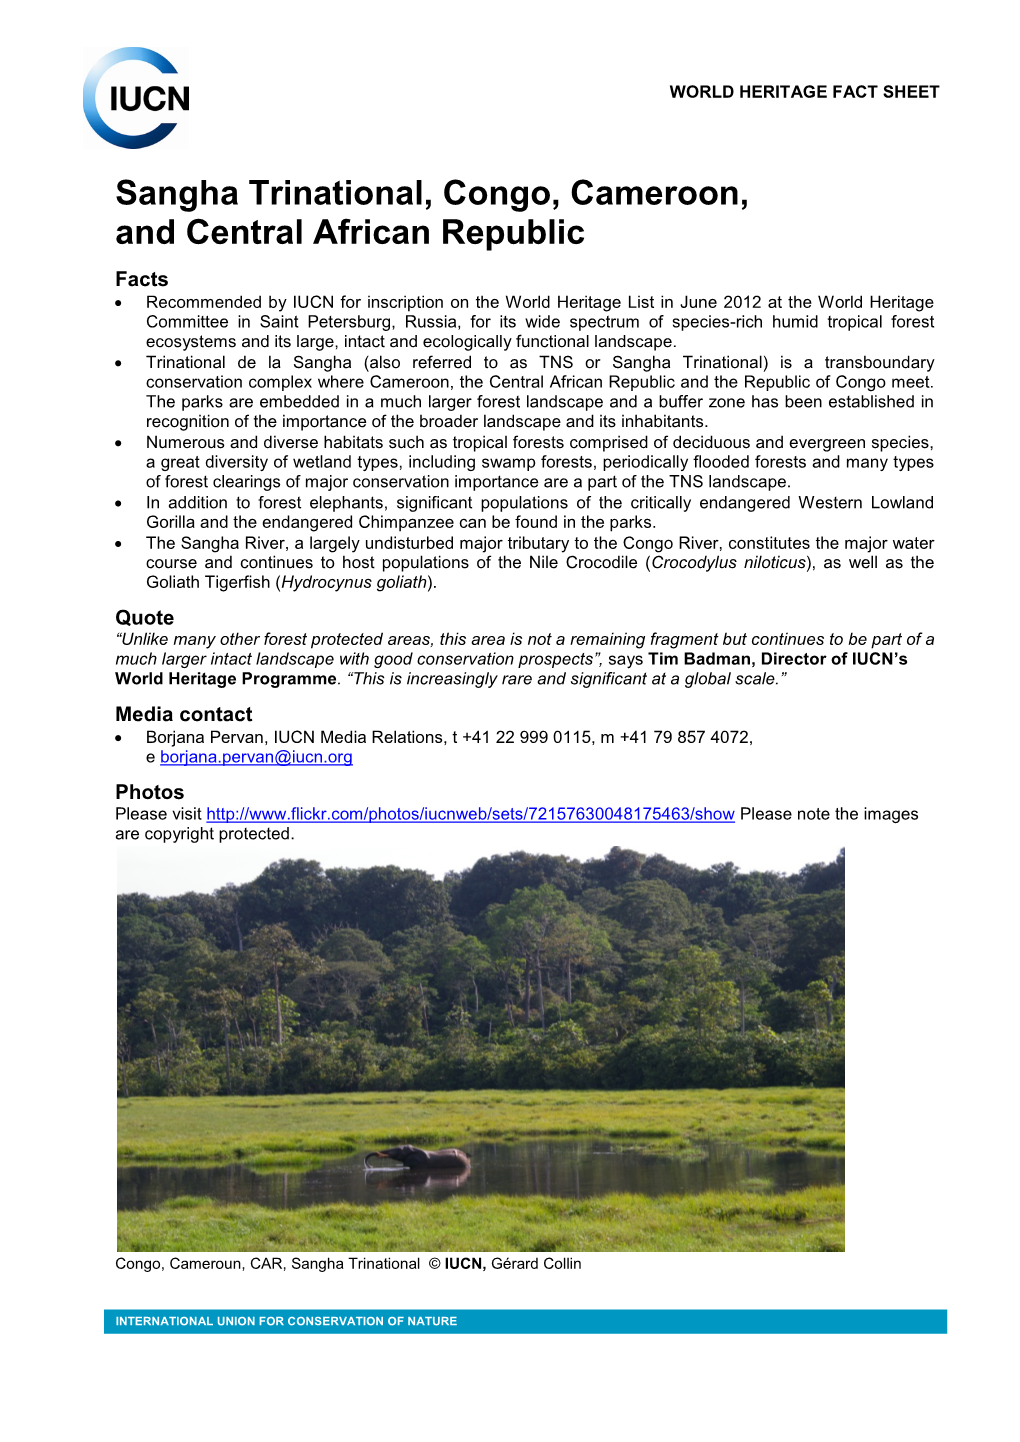 Sangha Trinational, Congo, Cameroon, and Central African Republic